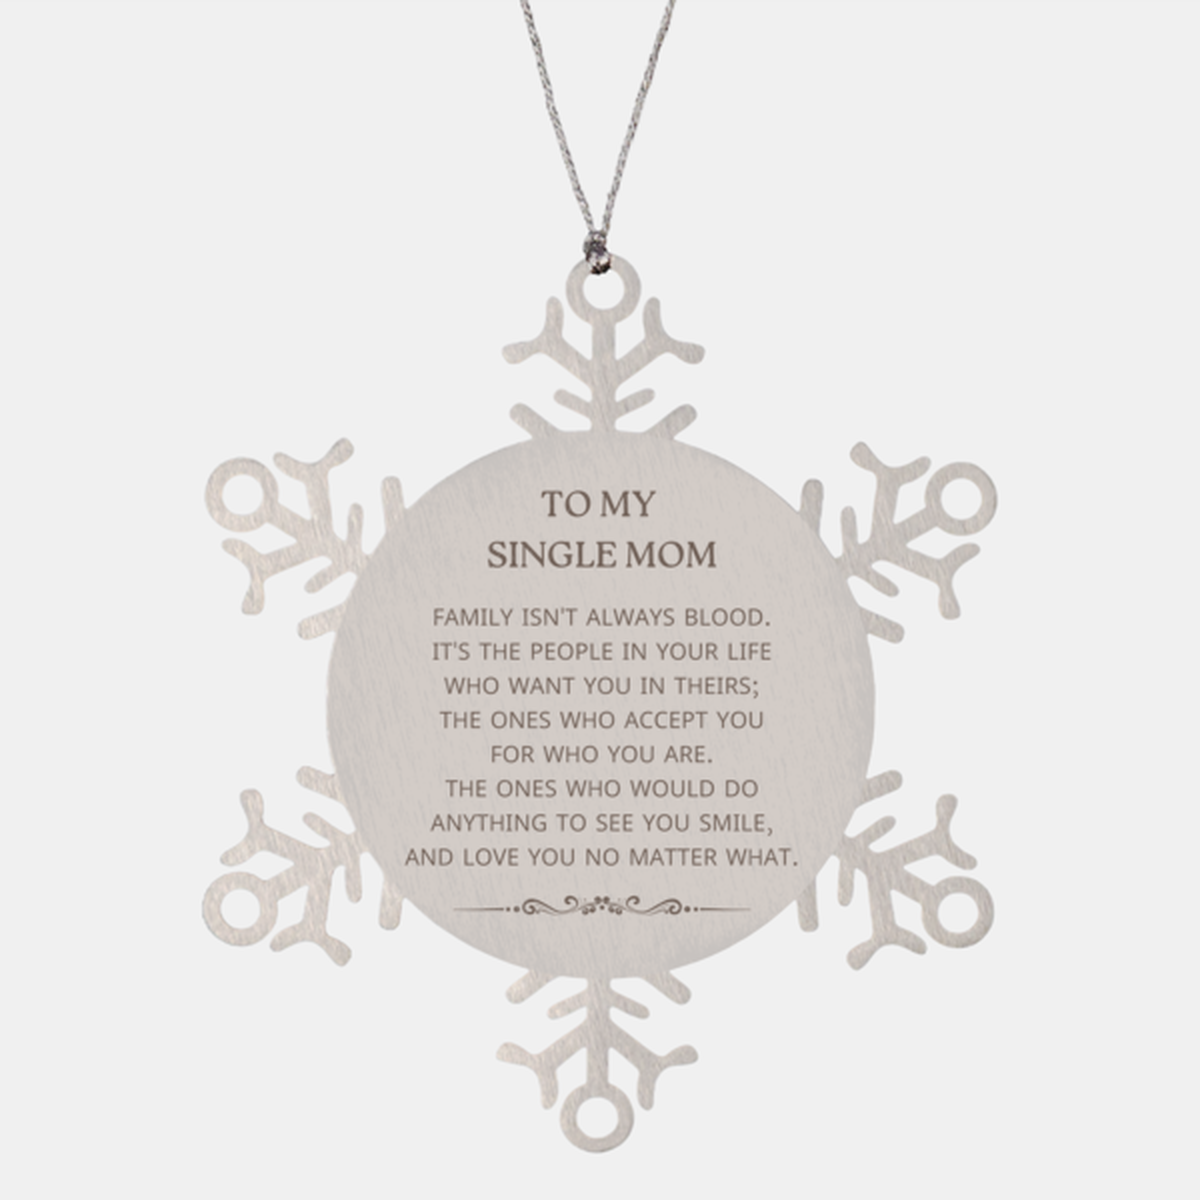 To My Single Mom Gifts, Family isn't always blood, Single Mom Snowflake Ornament, Birthday Christmas Unique Present For Single Mom